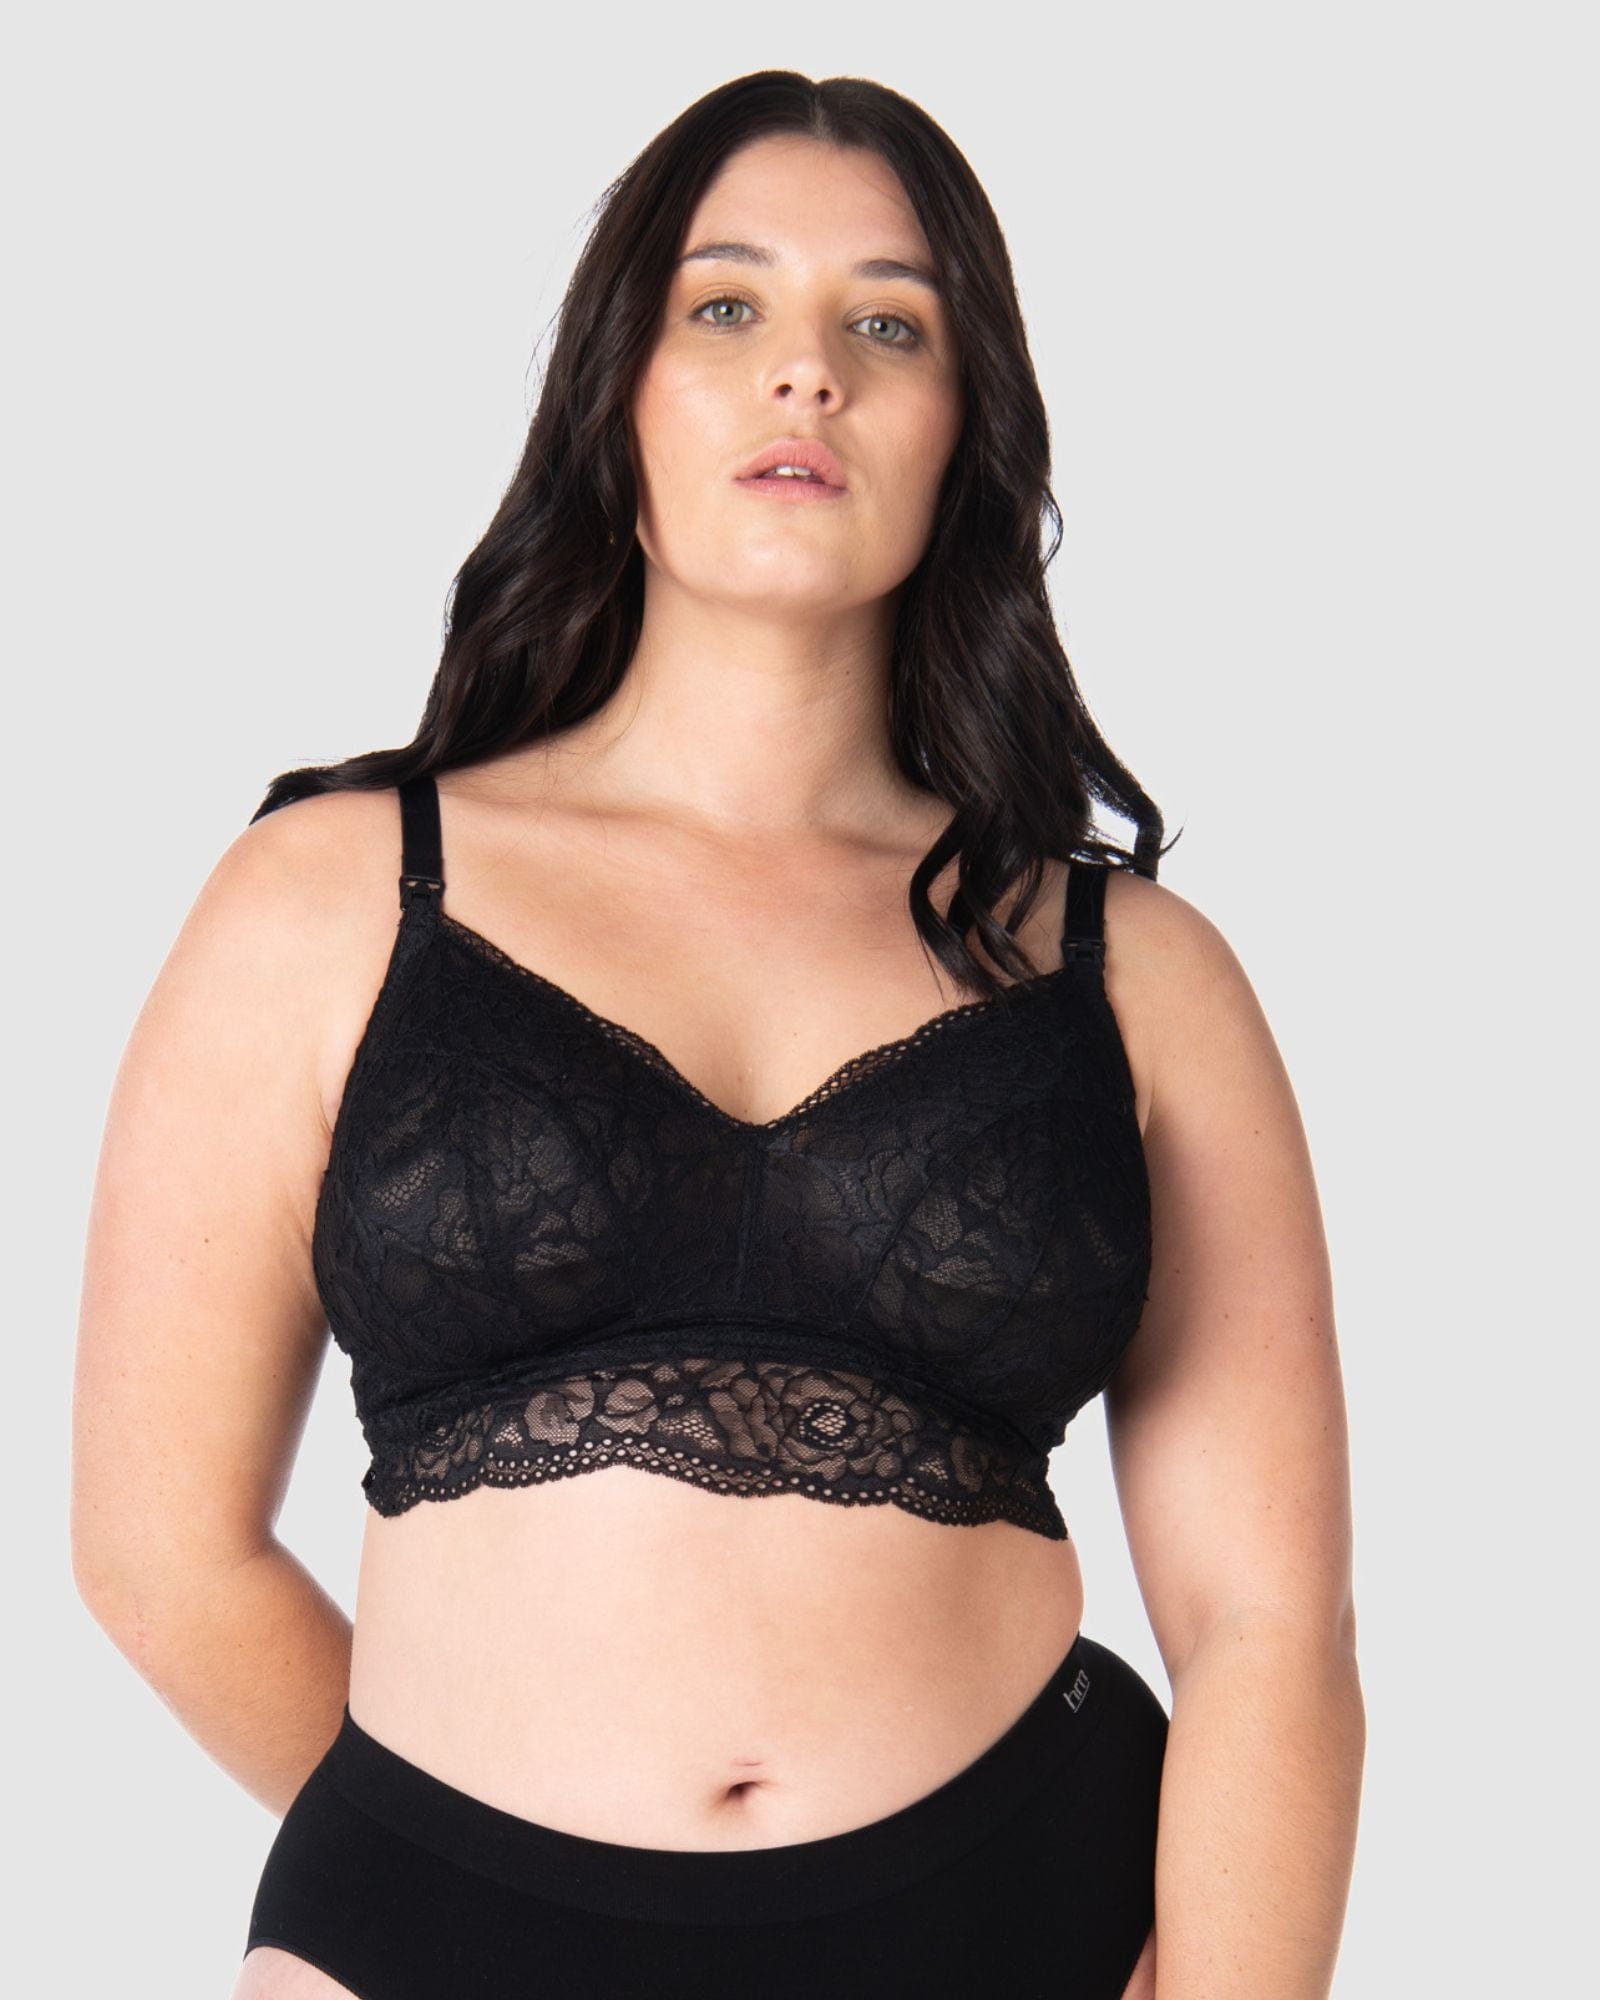 H&M has very confy soft cup bra! Great support for small boobs